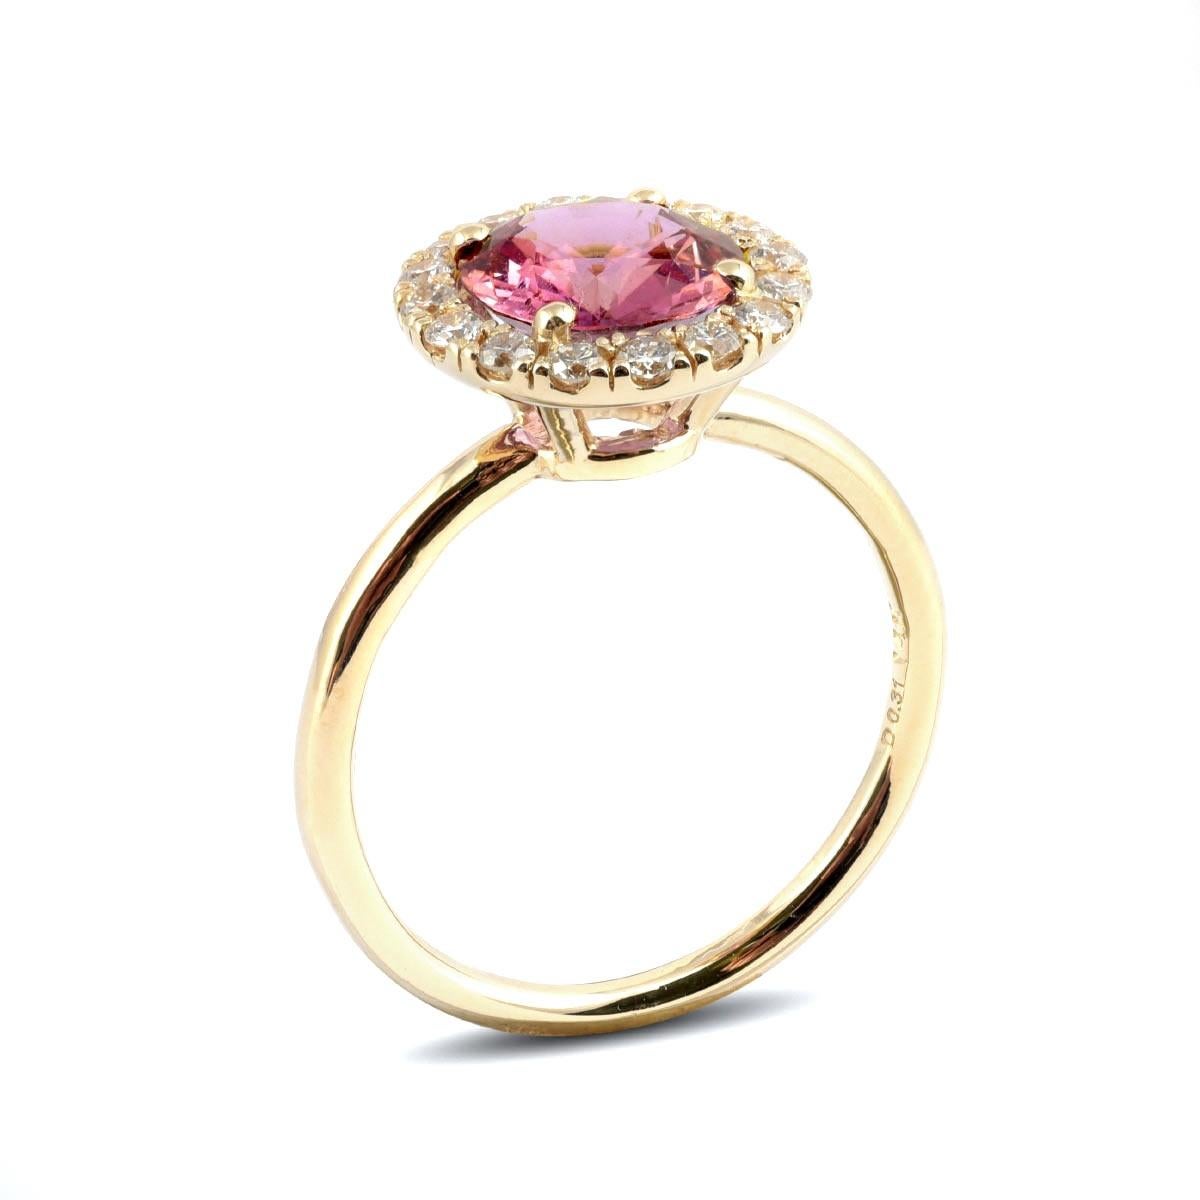 This simple yet pure design features a 1.93 carat, even toned Pink Sapphire set at the center of this delicate ring. Soulful, feminine and full of radiant color, here is a pink beauty that will easily have you falling in love. Surrounded by a well